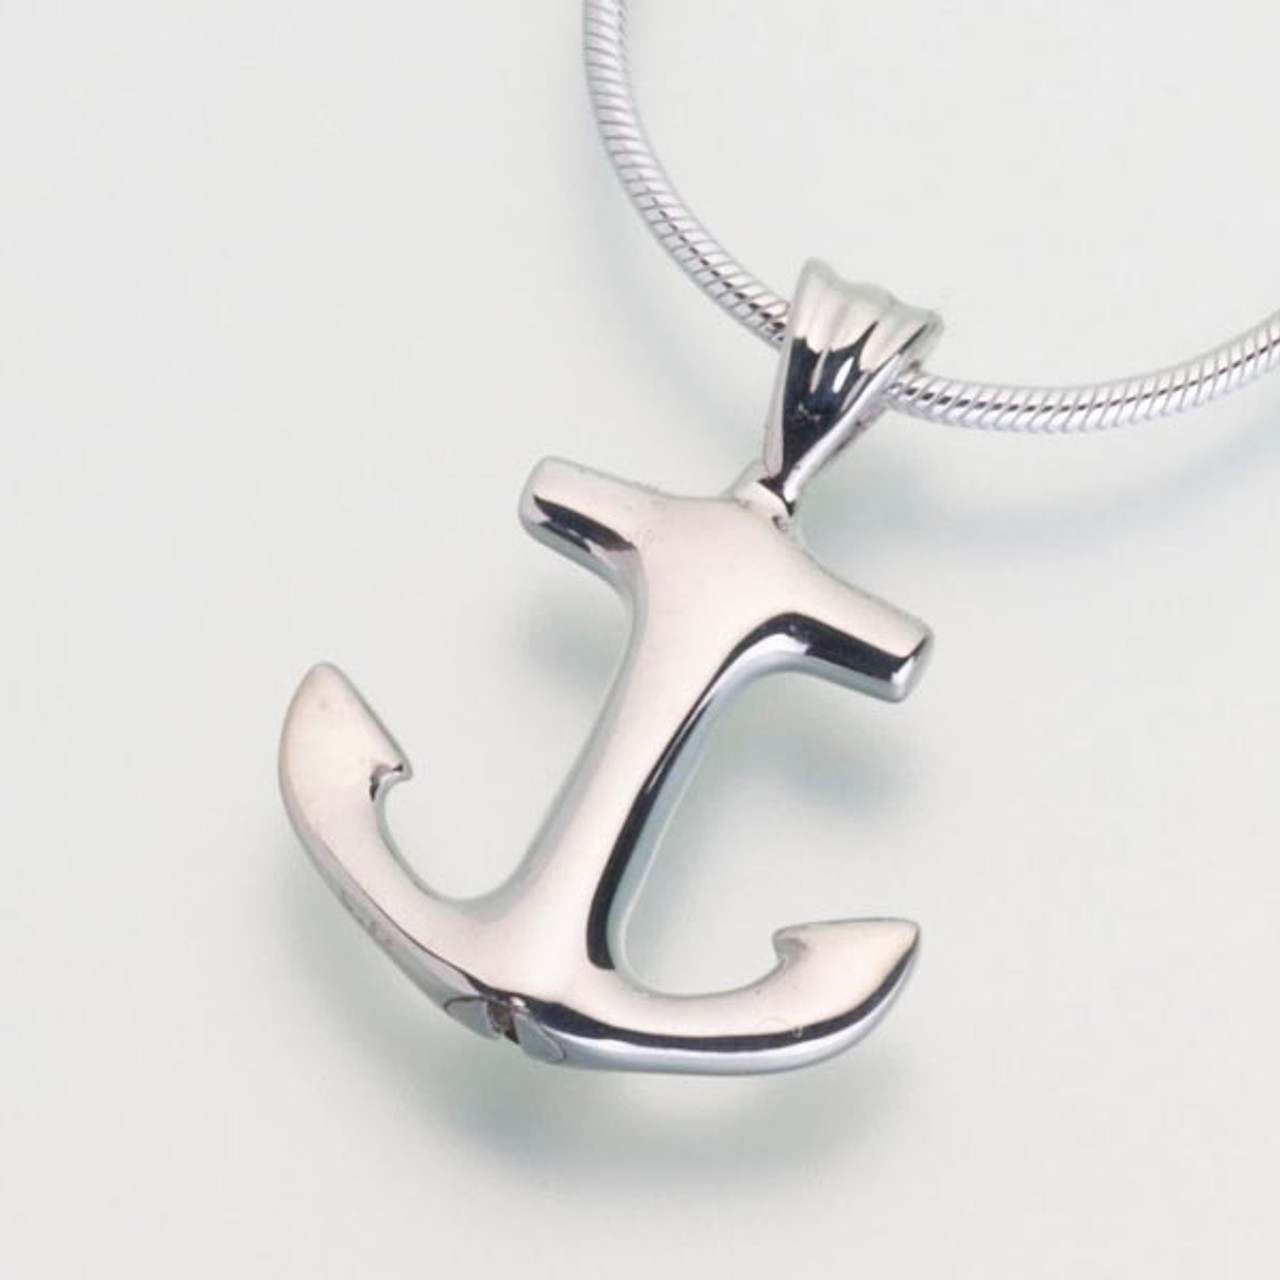 Anchor necklace for men, men's anchor necklace with black cord, silver  charm. gift for him, surfer beach nautical necklace, men jewelry – Shani &  Adi Jewelry